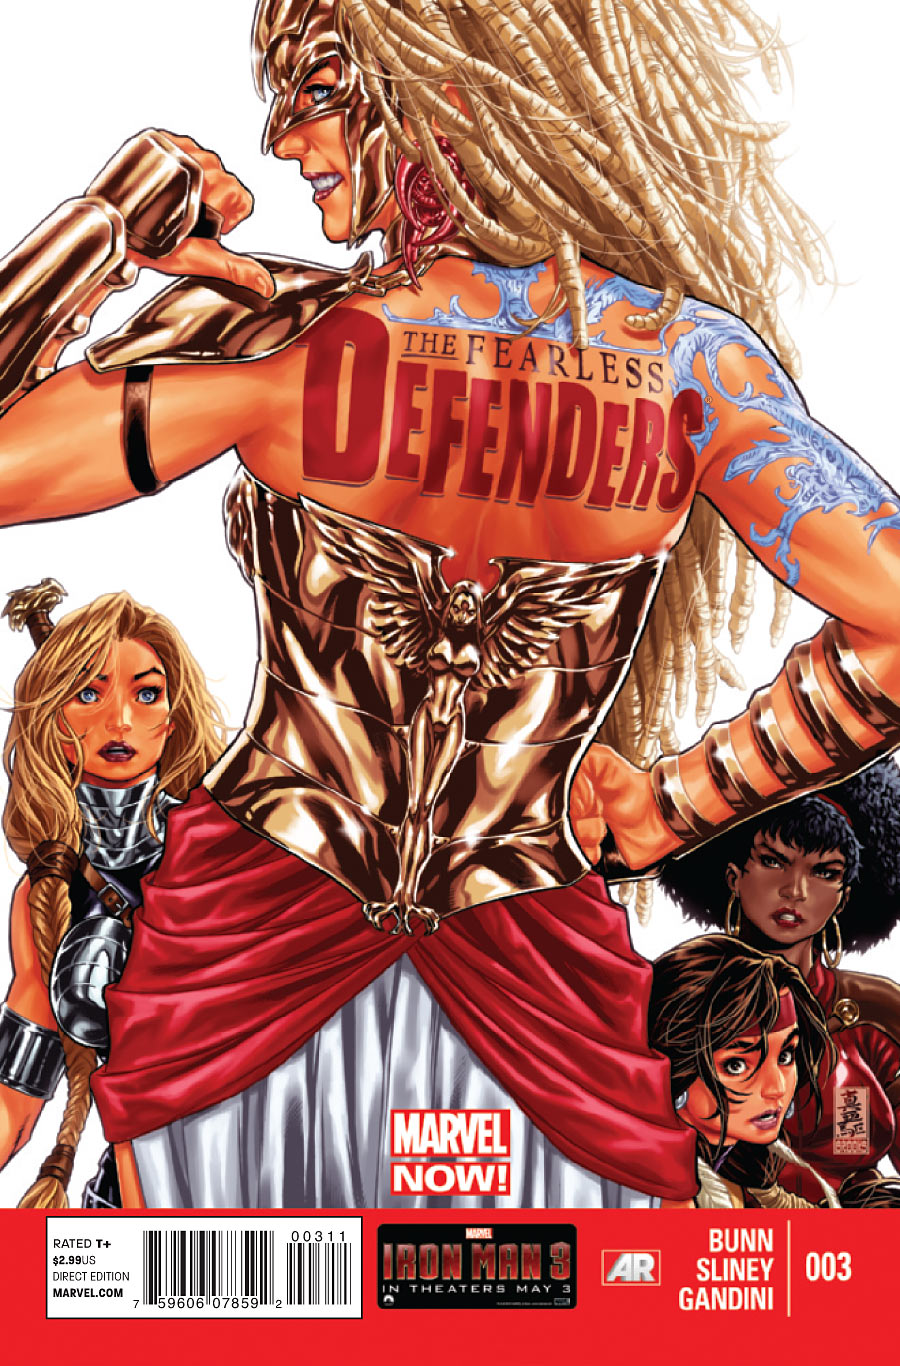 The Fearless Defenders, Vol. 1 by Cullen Bunn